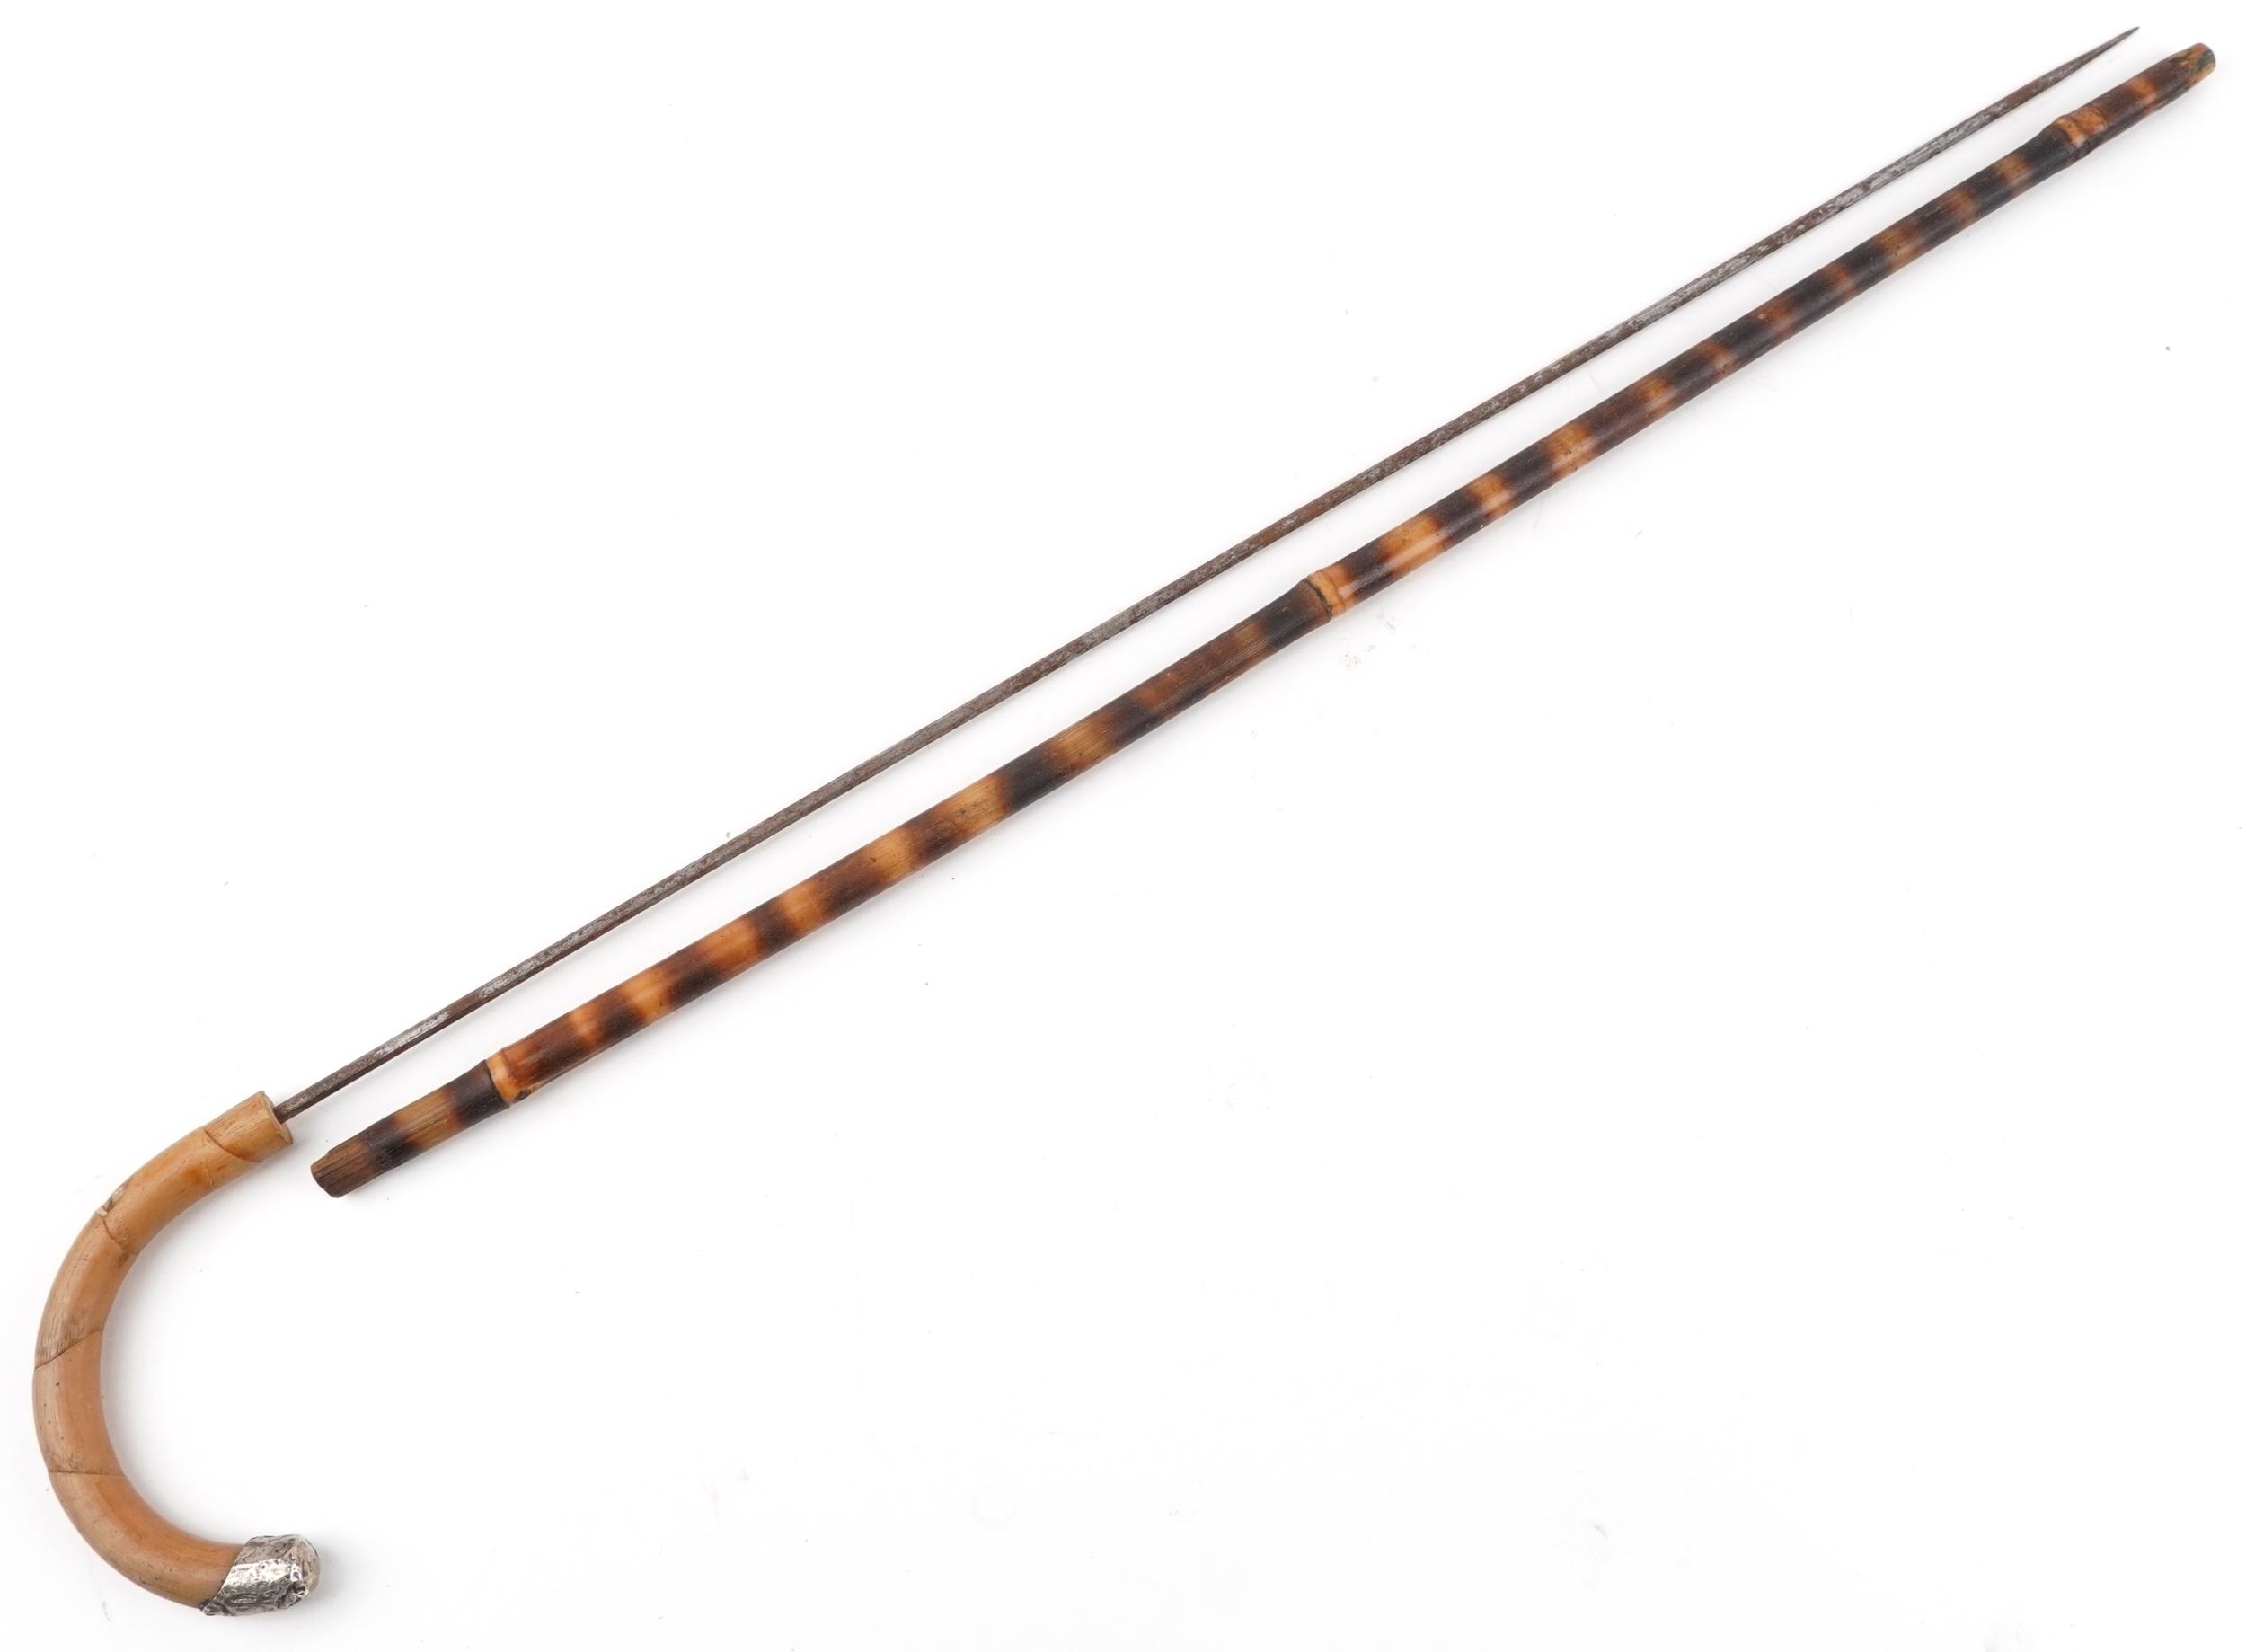 Bamboo walking swordstick with steel blade and silver mount impressed Brigg, 84.5cm in length - Image 3 of 4